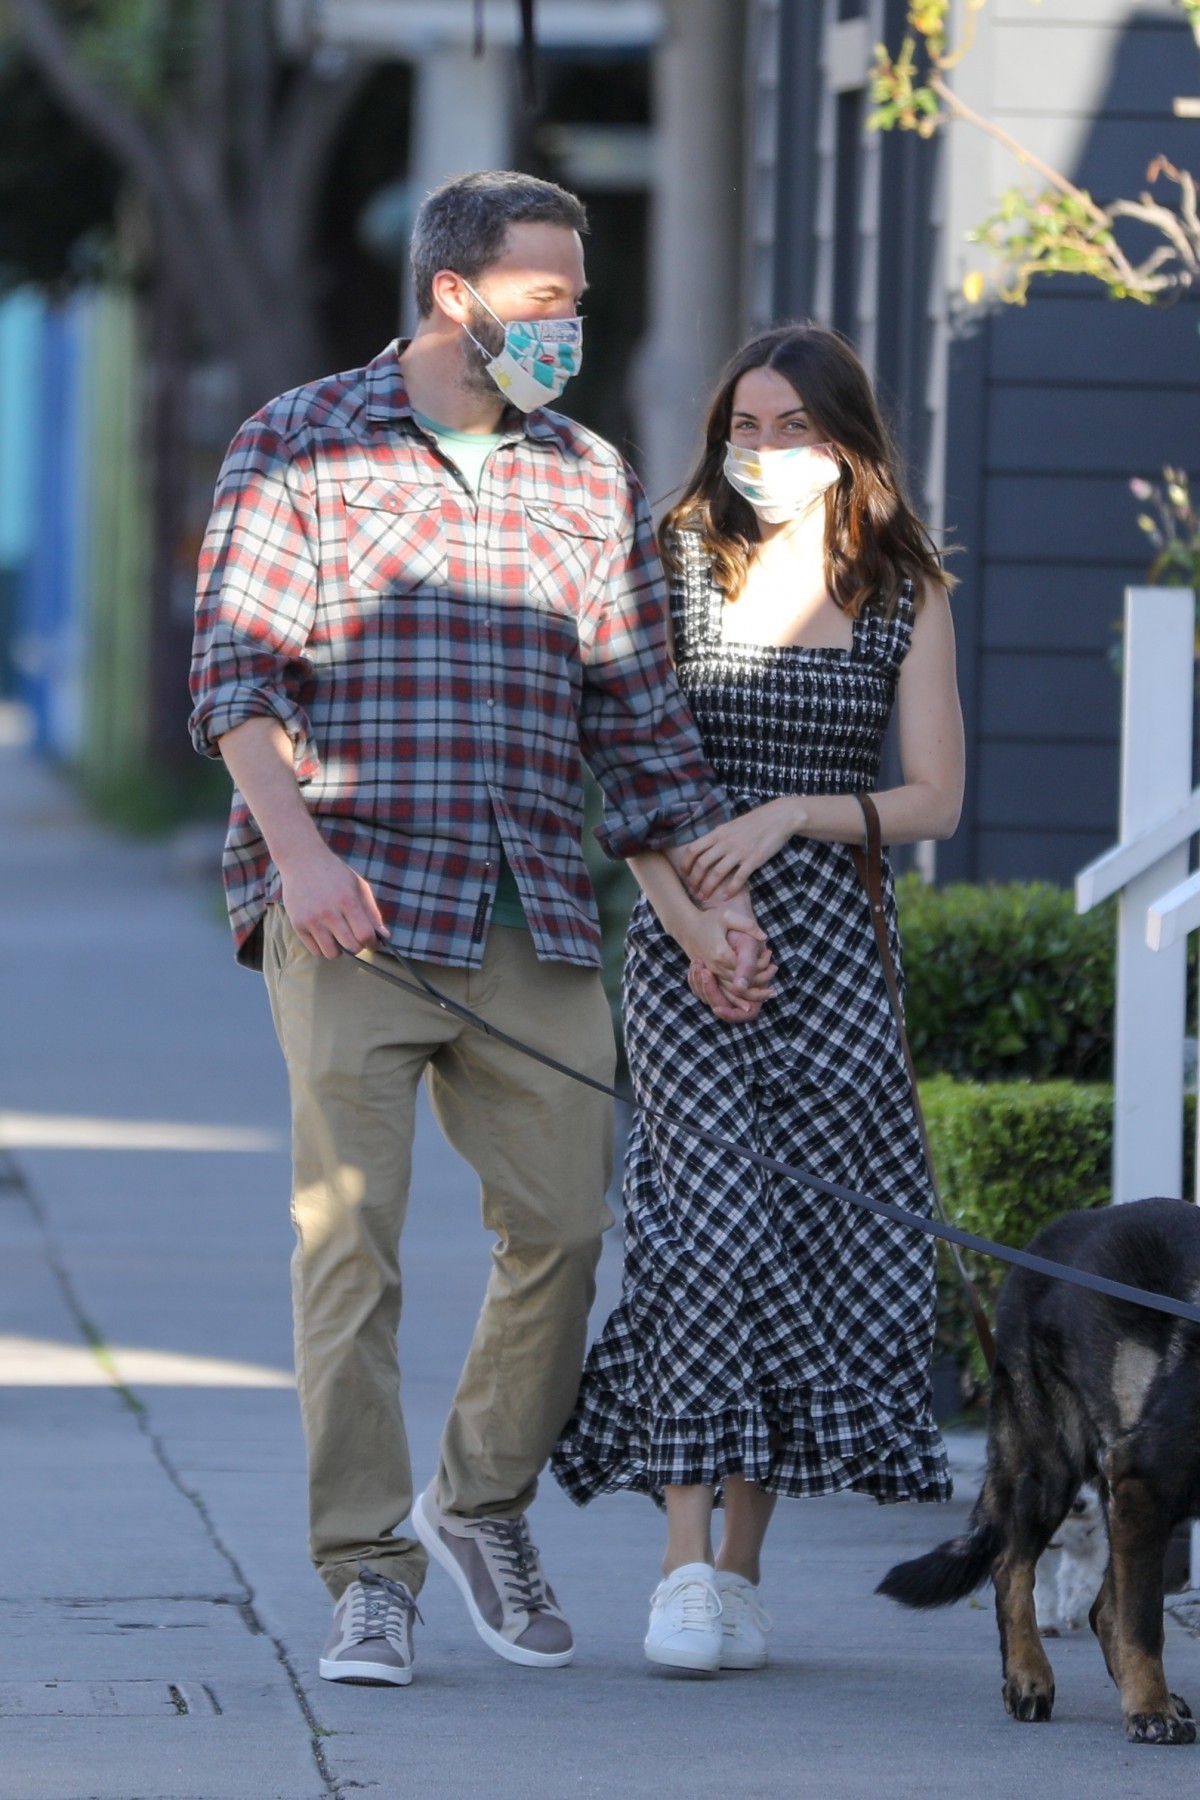 Ben Affleck takes a sunset stroll with his lovely quarantine partner Ana de Armas